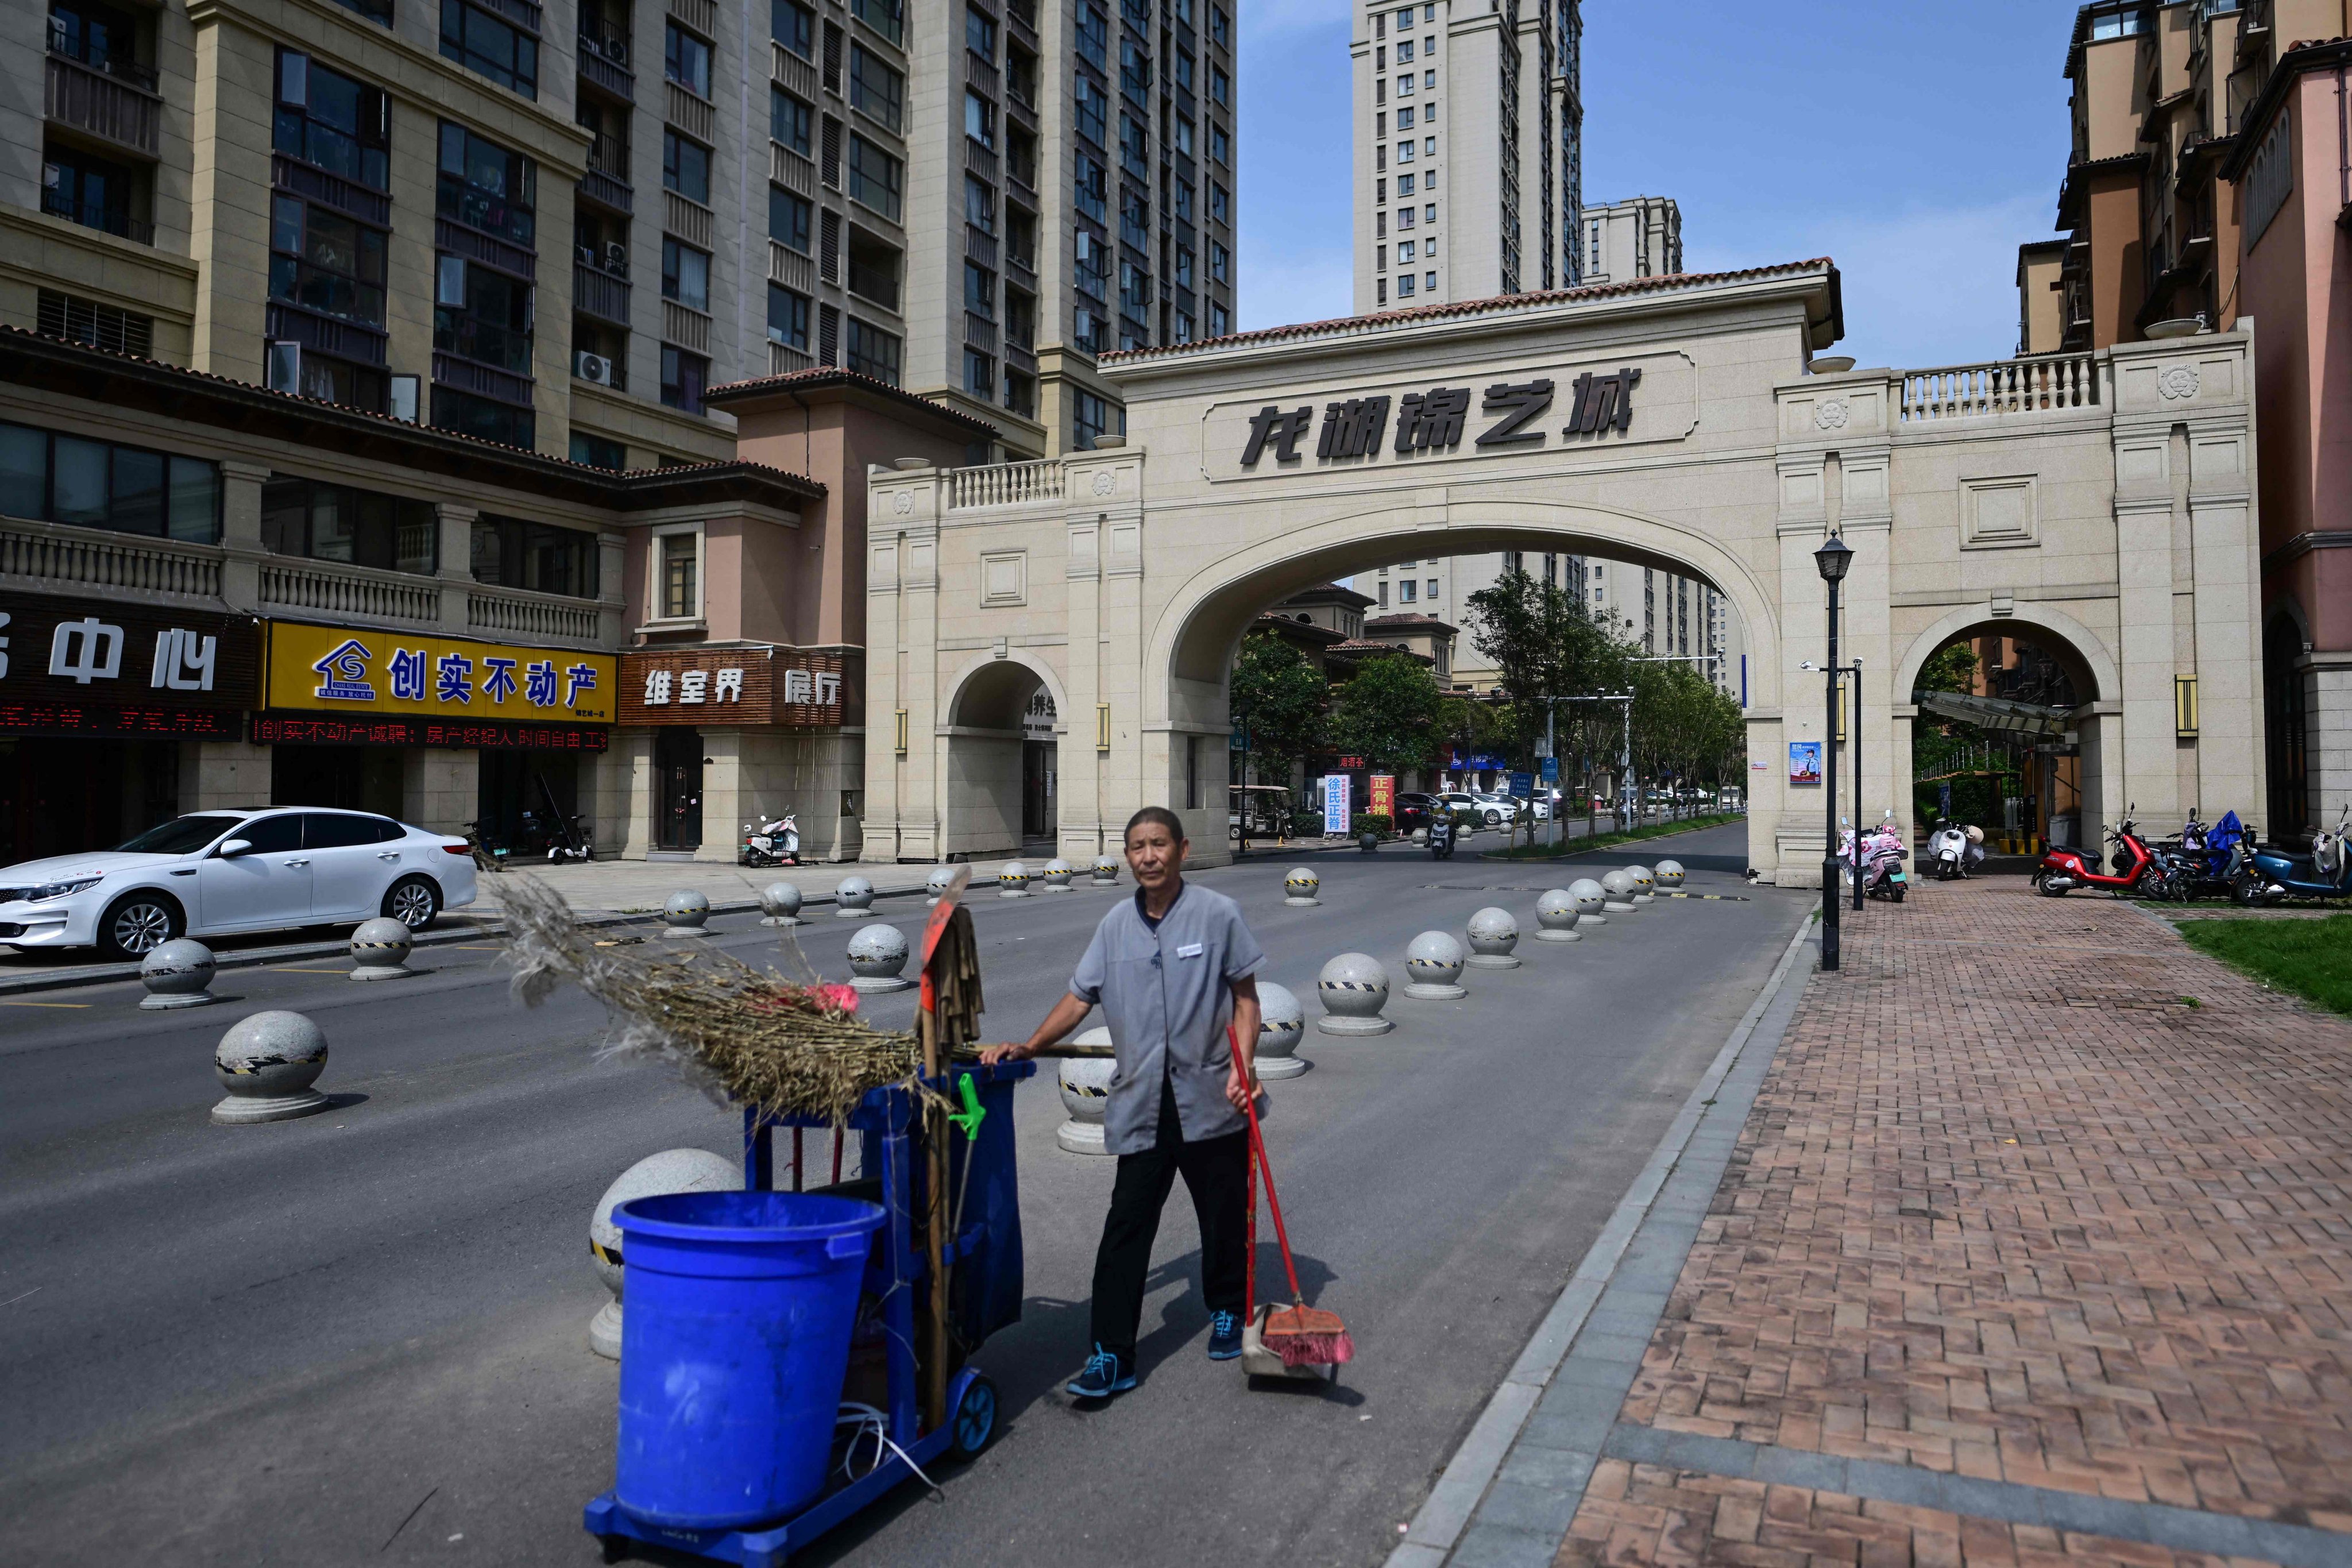 A cleaner walks through a complex of unfinished flats in Xinzheng City, in Zhengzhou, Henan province, on June 20. The continued struggles of China’s property sector are among several factors driving hopes of more aggressive stimulus measures. Photo: AFP